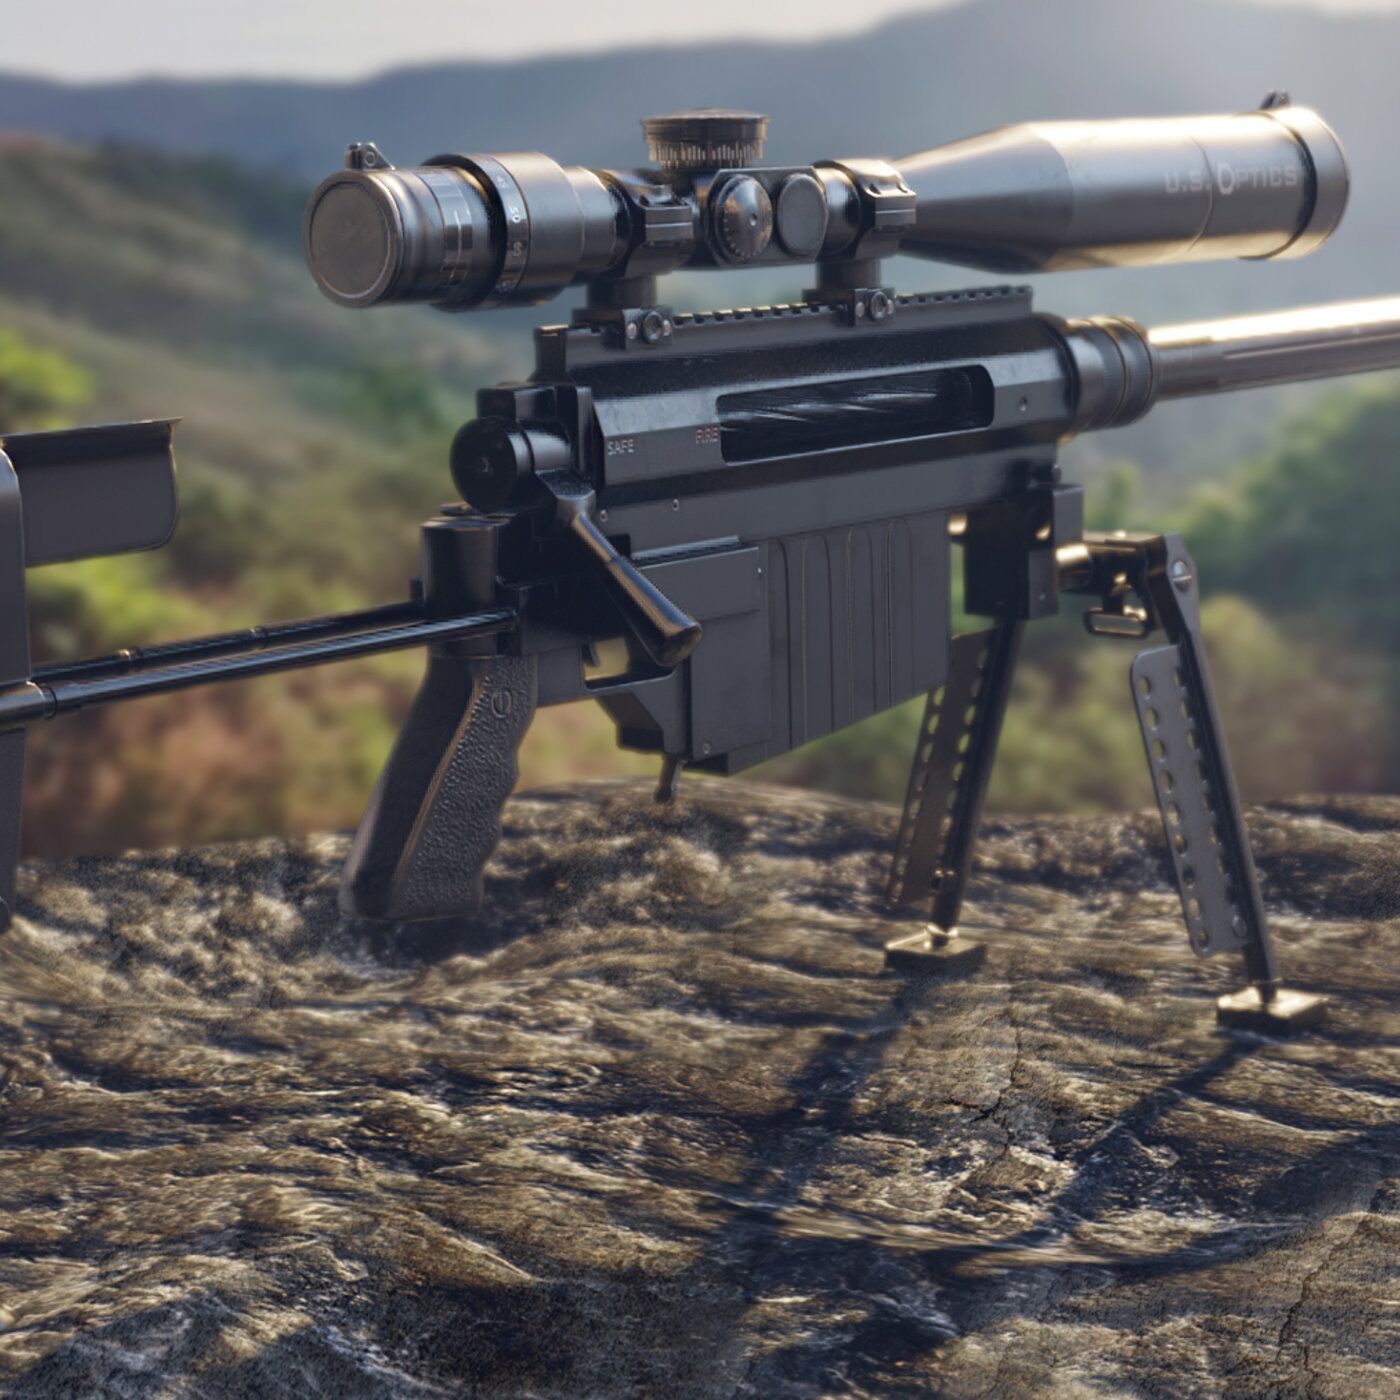 General 1400x1400 gun USA CheyTac Intervention scopes side view weapon American firearms sniper rifle